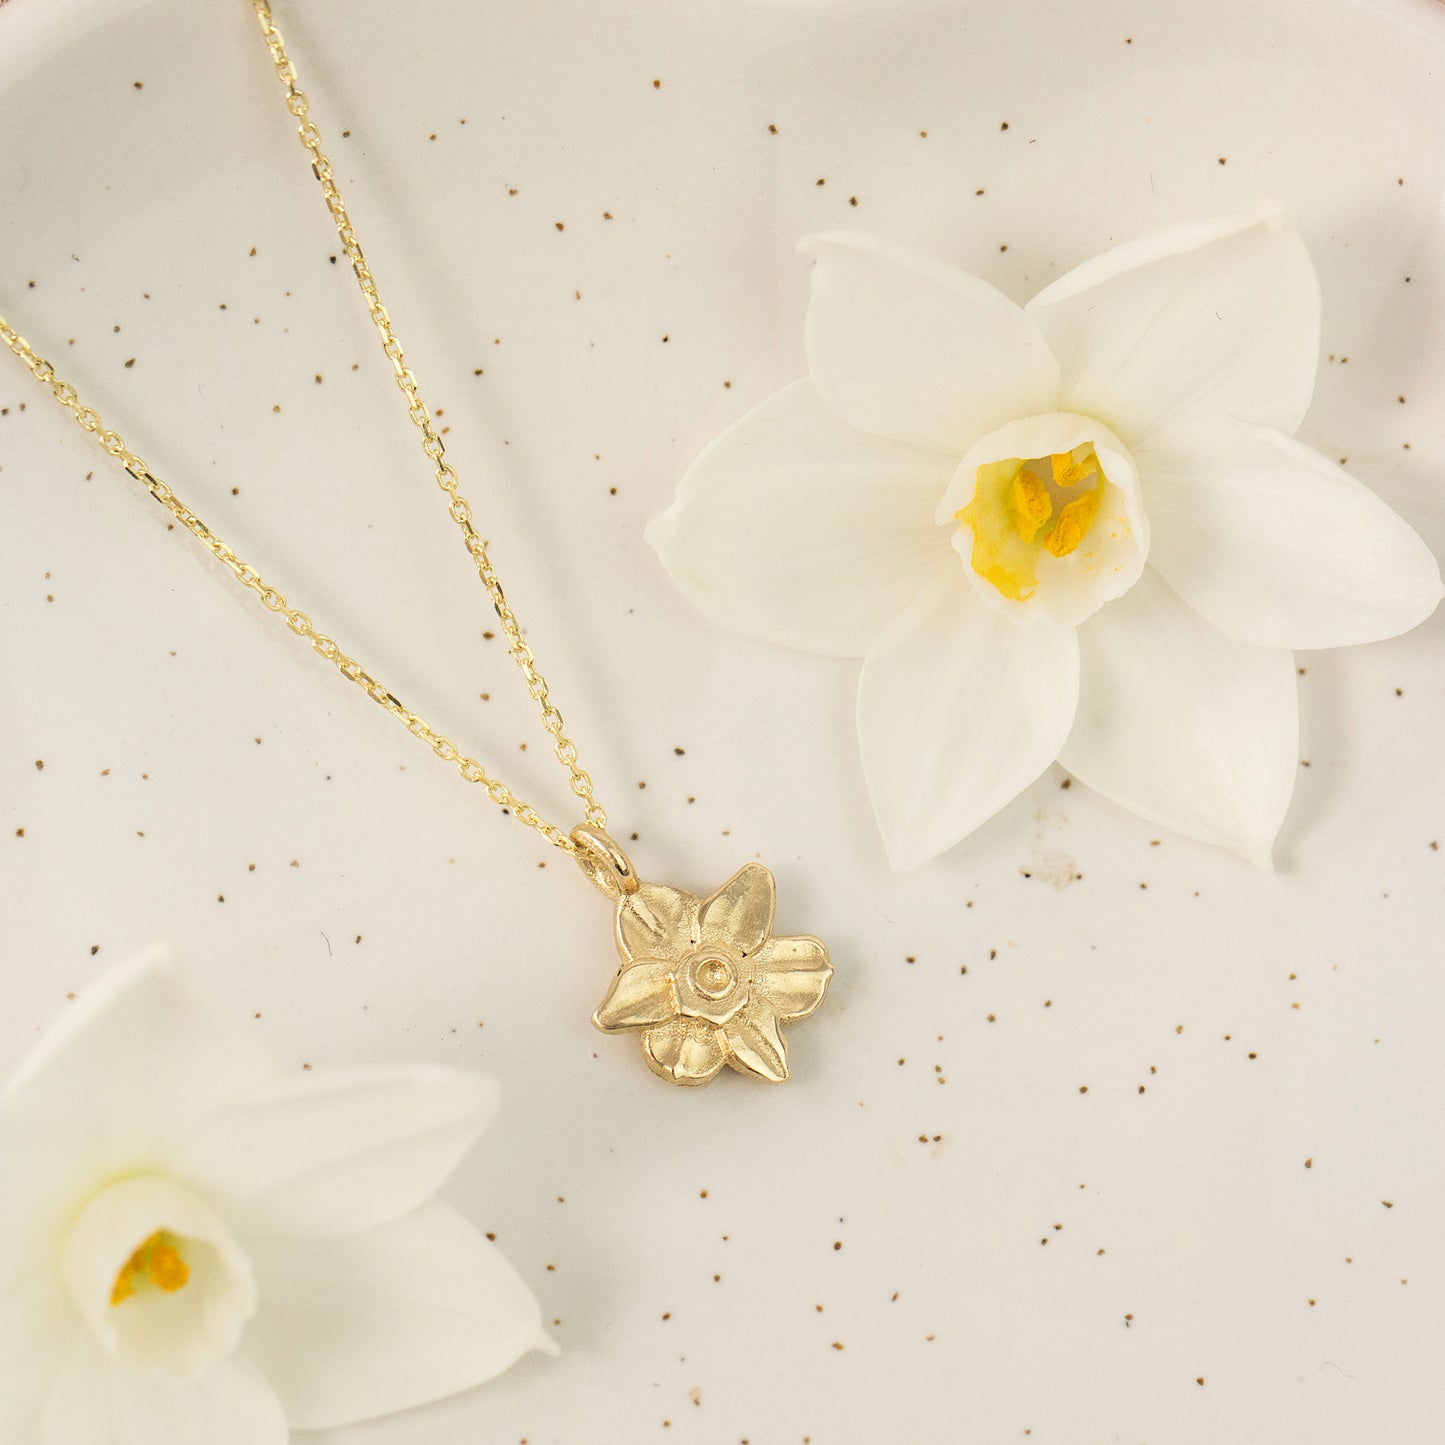 Daffodil necklace